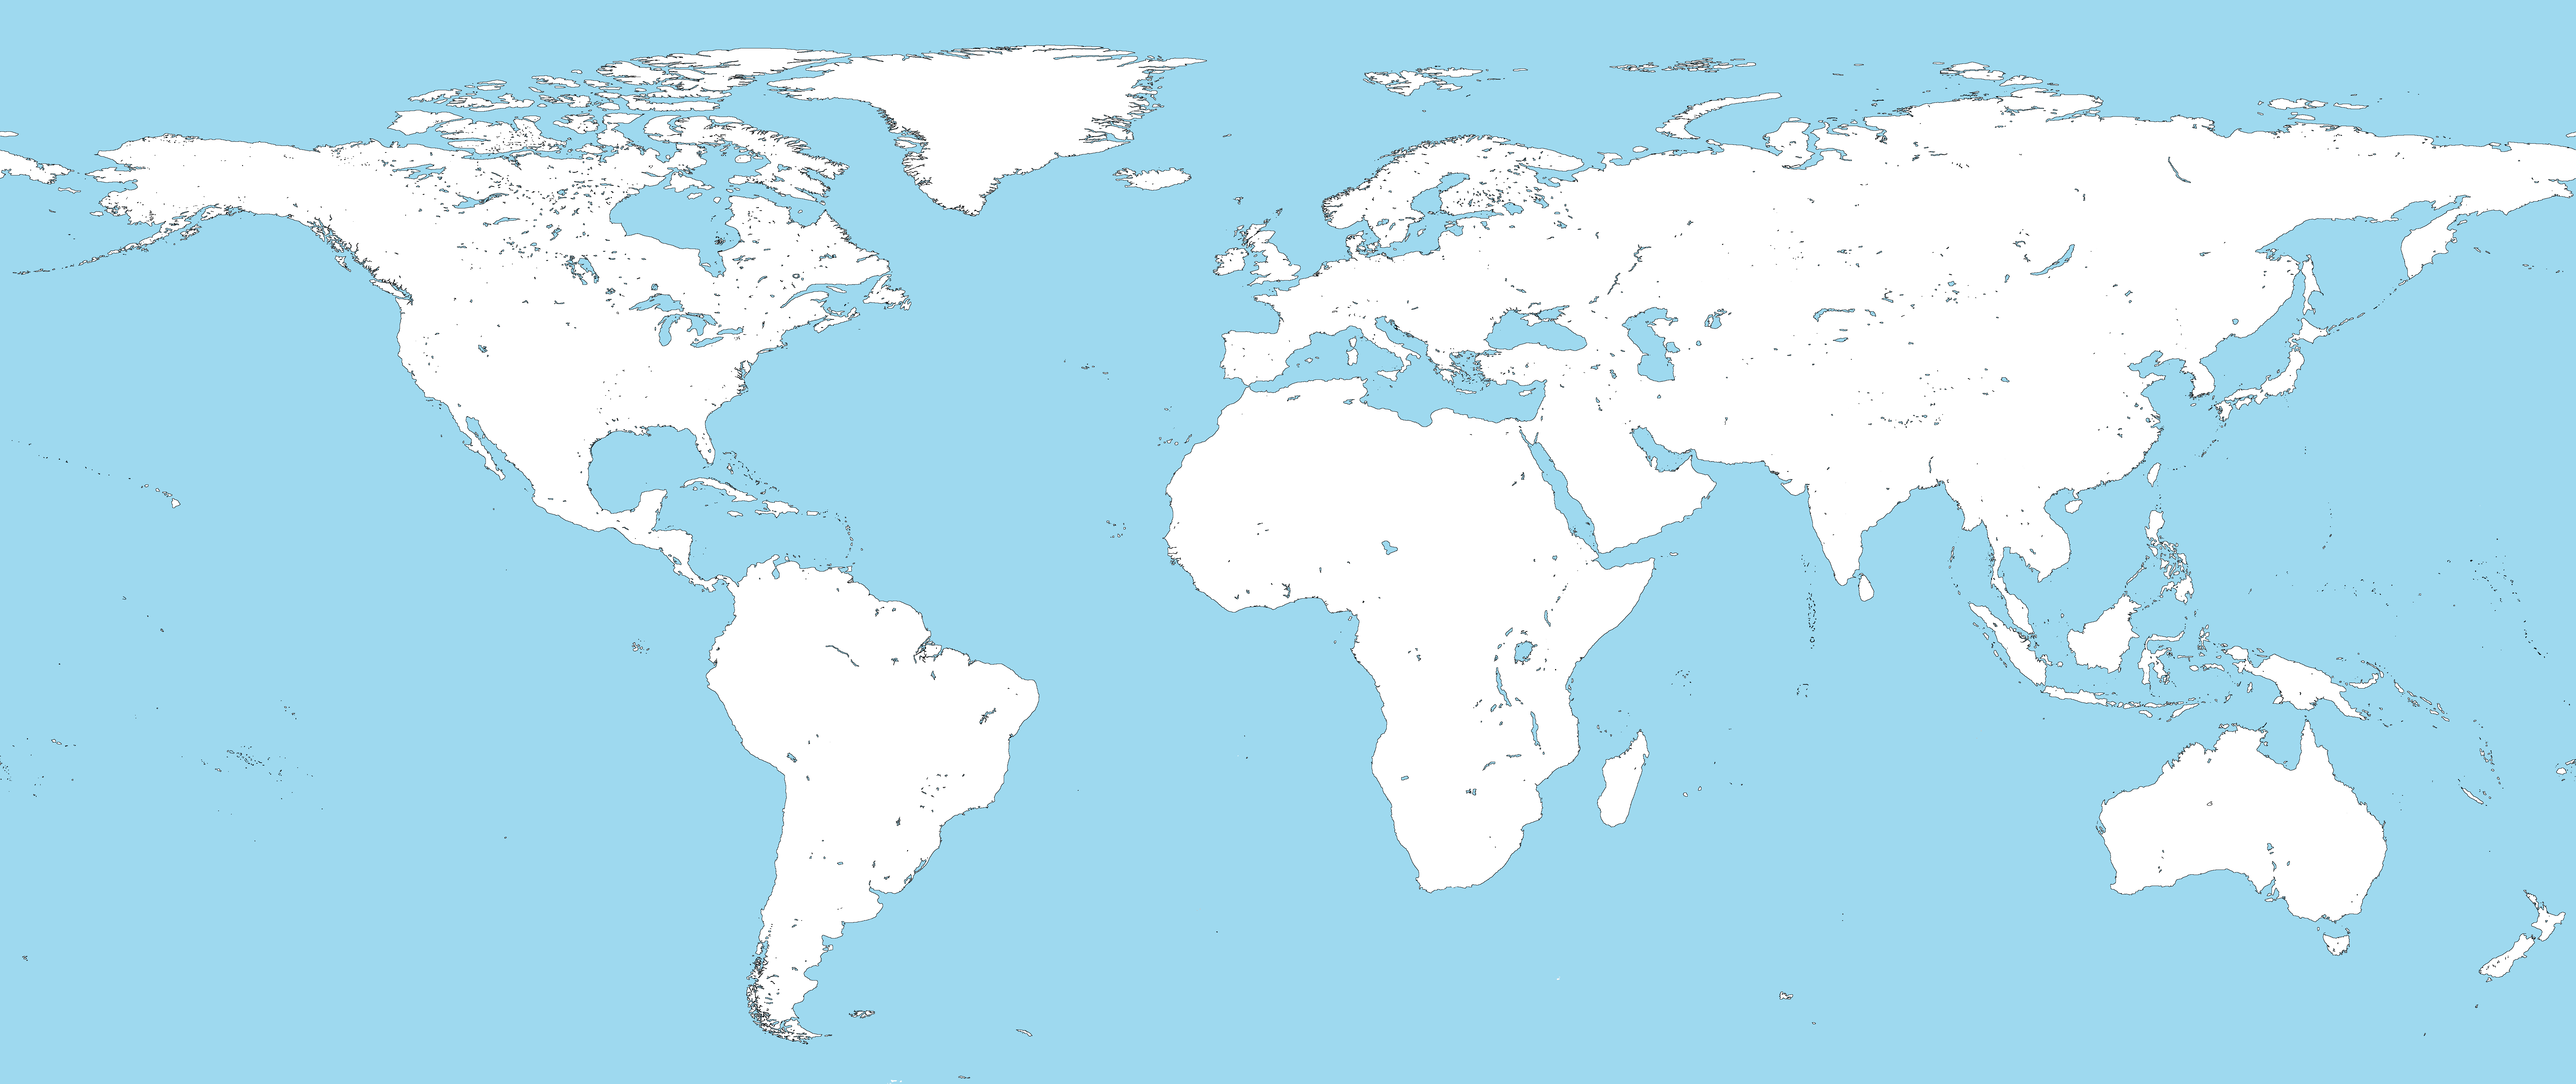 World Map Without Countries 